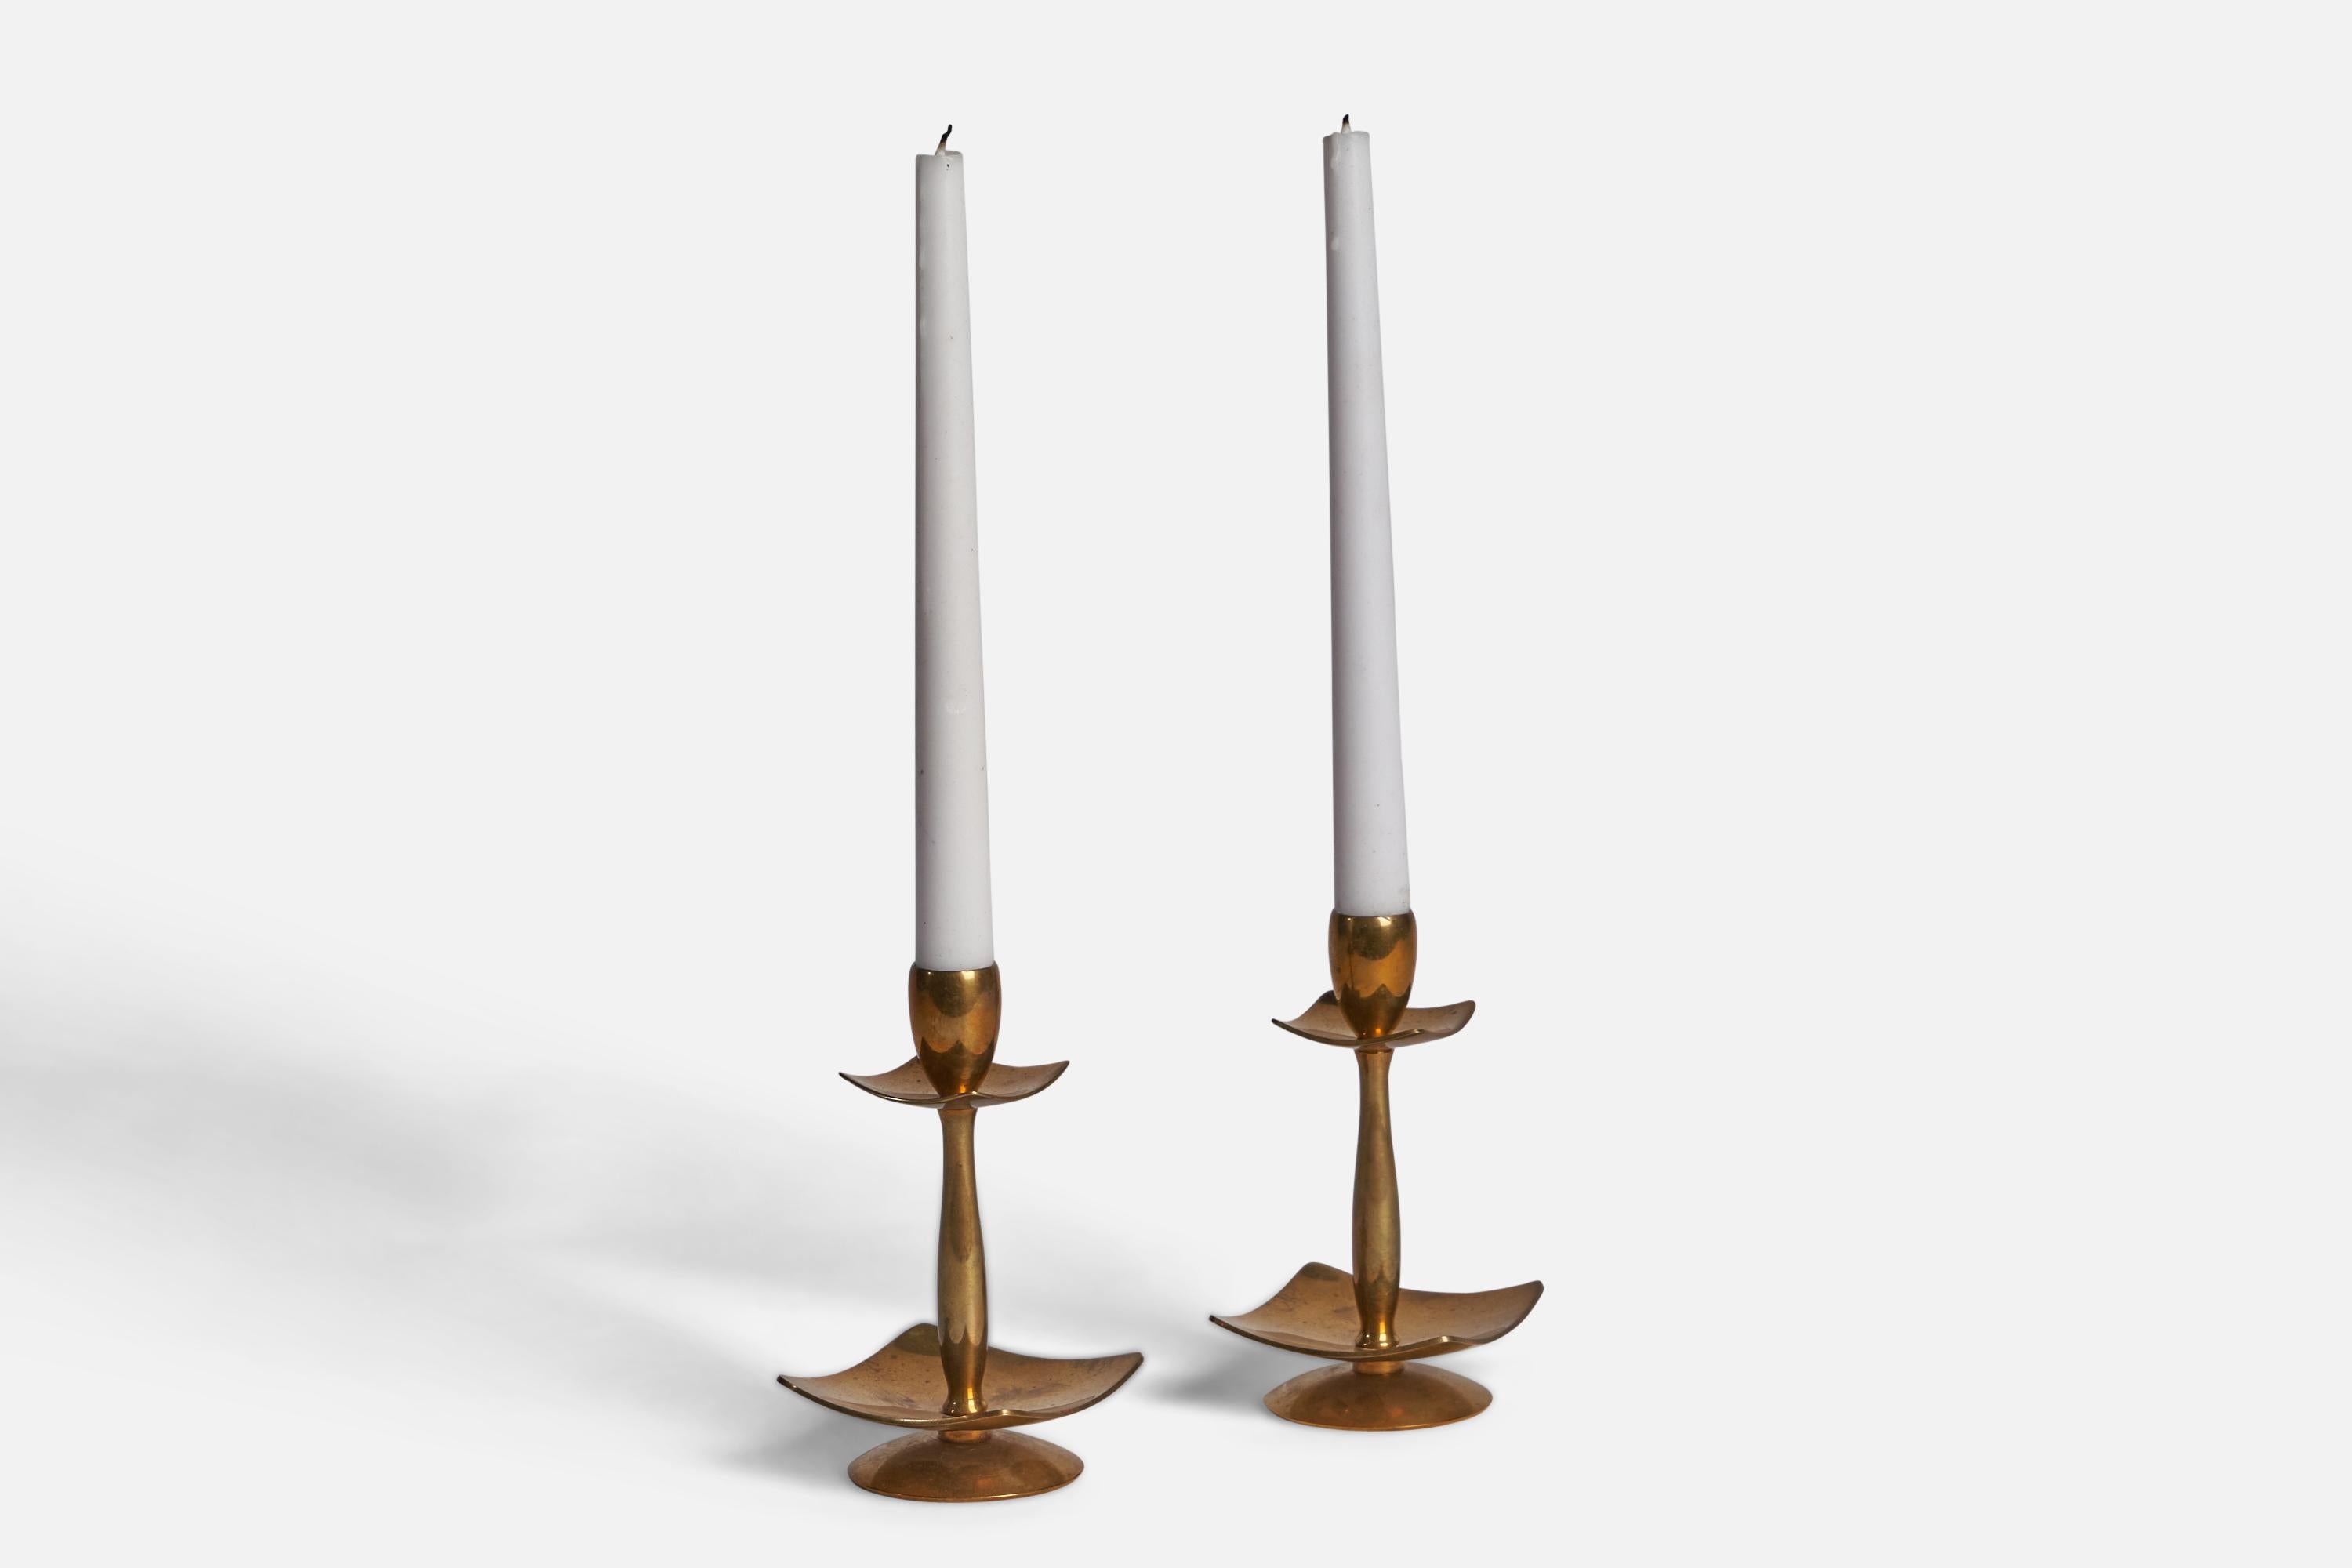 A pair of brass candlesticks designed and produced by Dantorp Design, Denmark, c. 1950s.

Fits 0.45” & 0.80” diameter candles